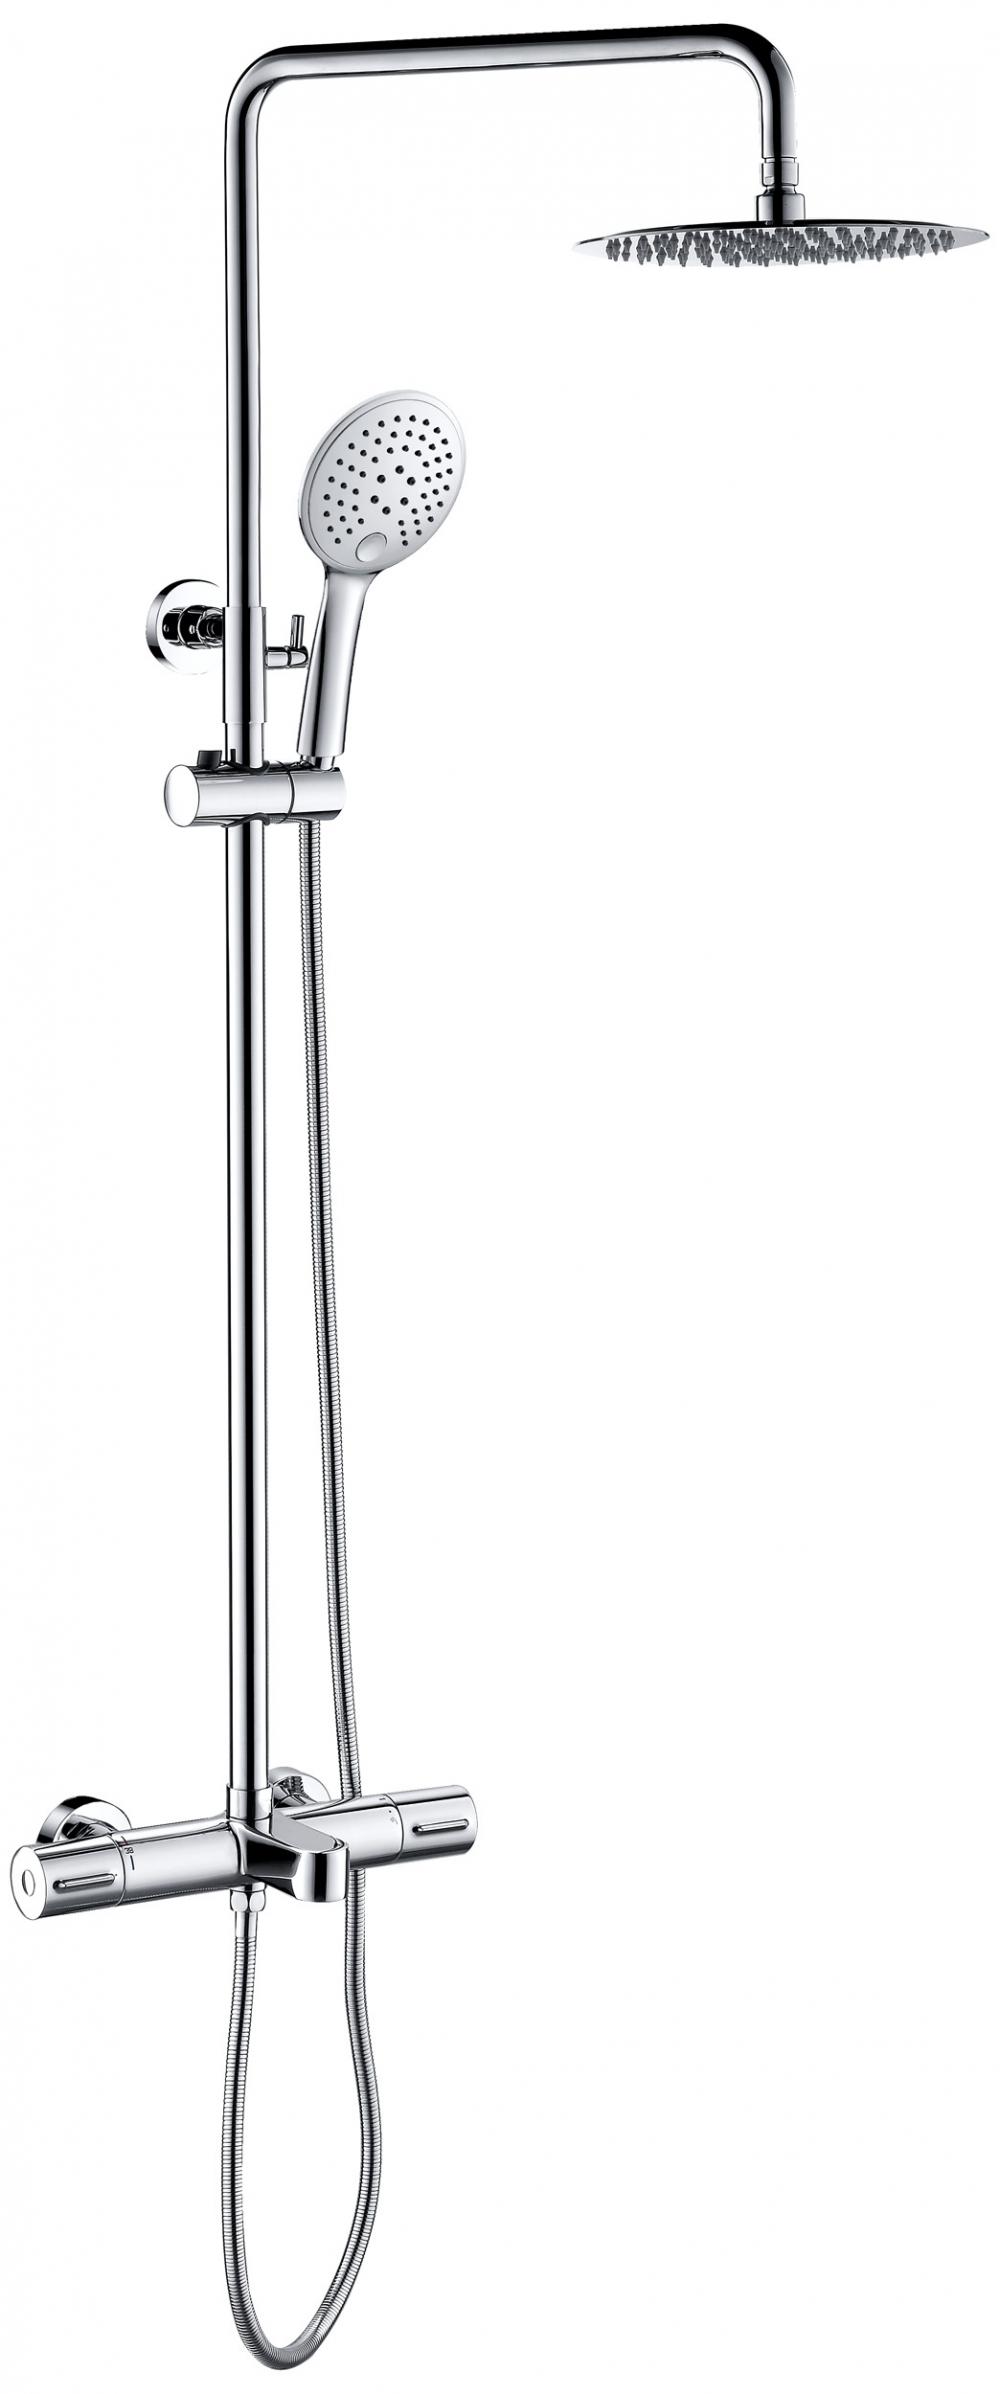 Modern Thermostatic Mixer Shower Dual Handle Valve